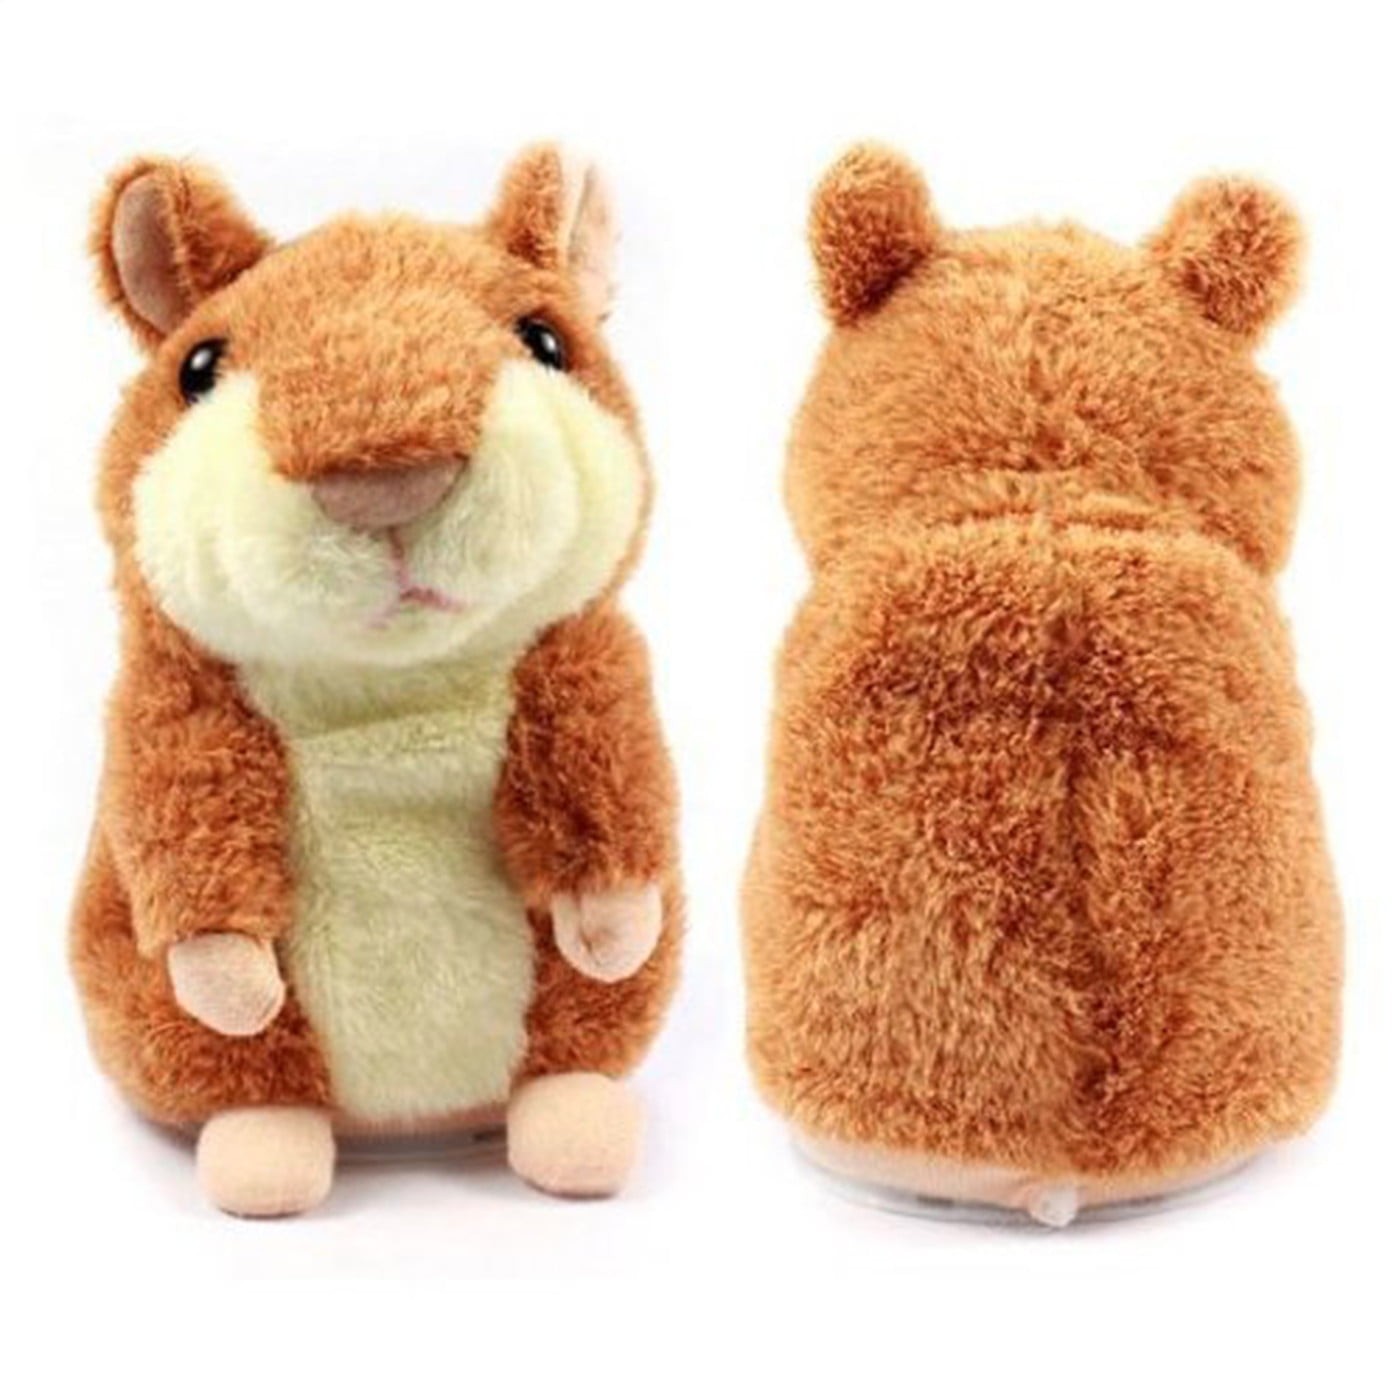 APUPPY Mimicry Pet Talking Hamster Repeats What You Say Plush Animal Toy Electronic Hamster Mouse for Boy and Girl Gift,3 x 5.7 inches Brown